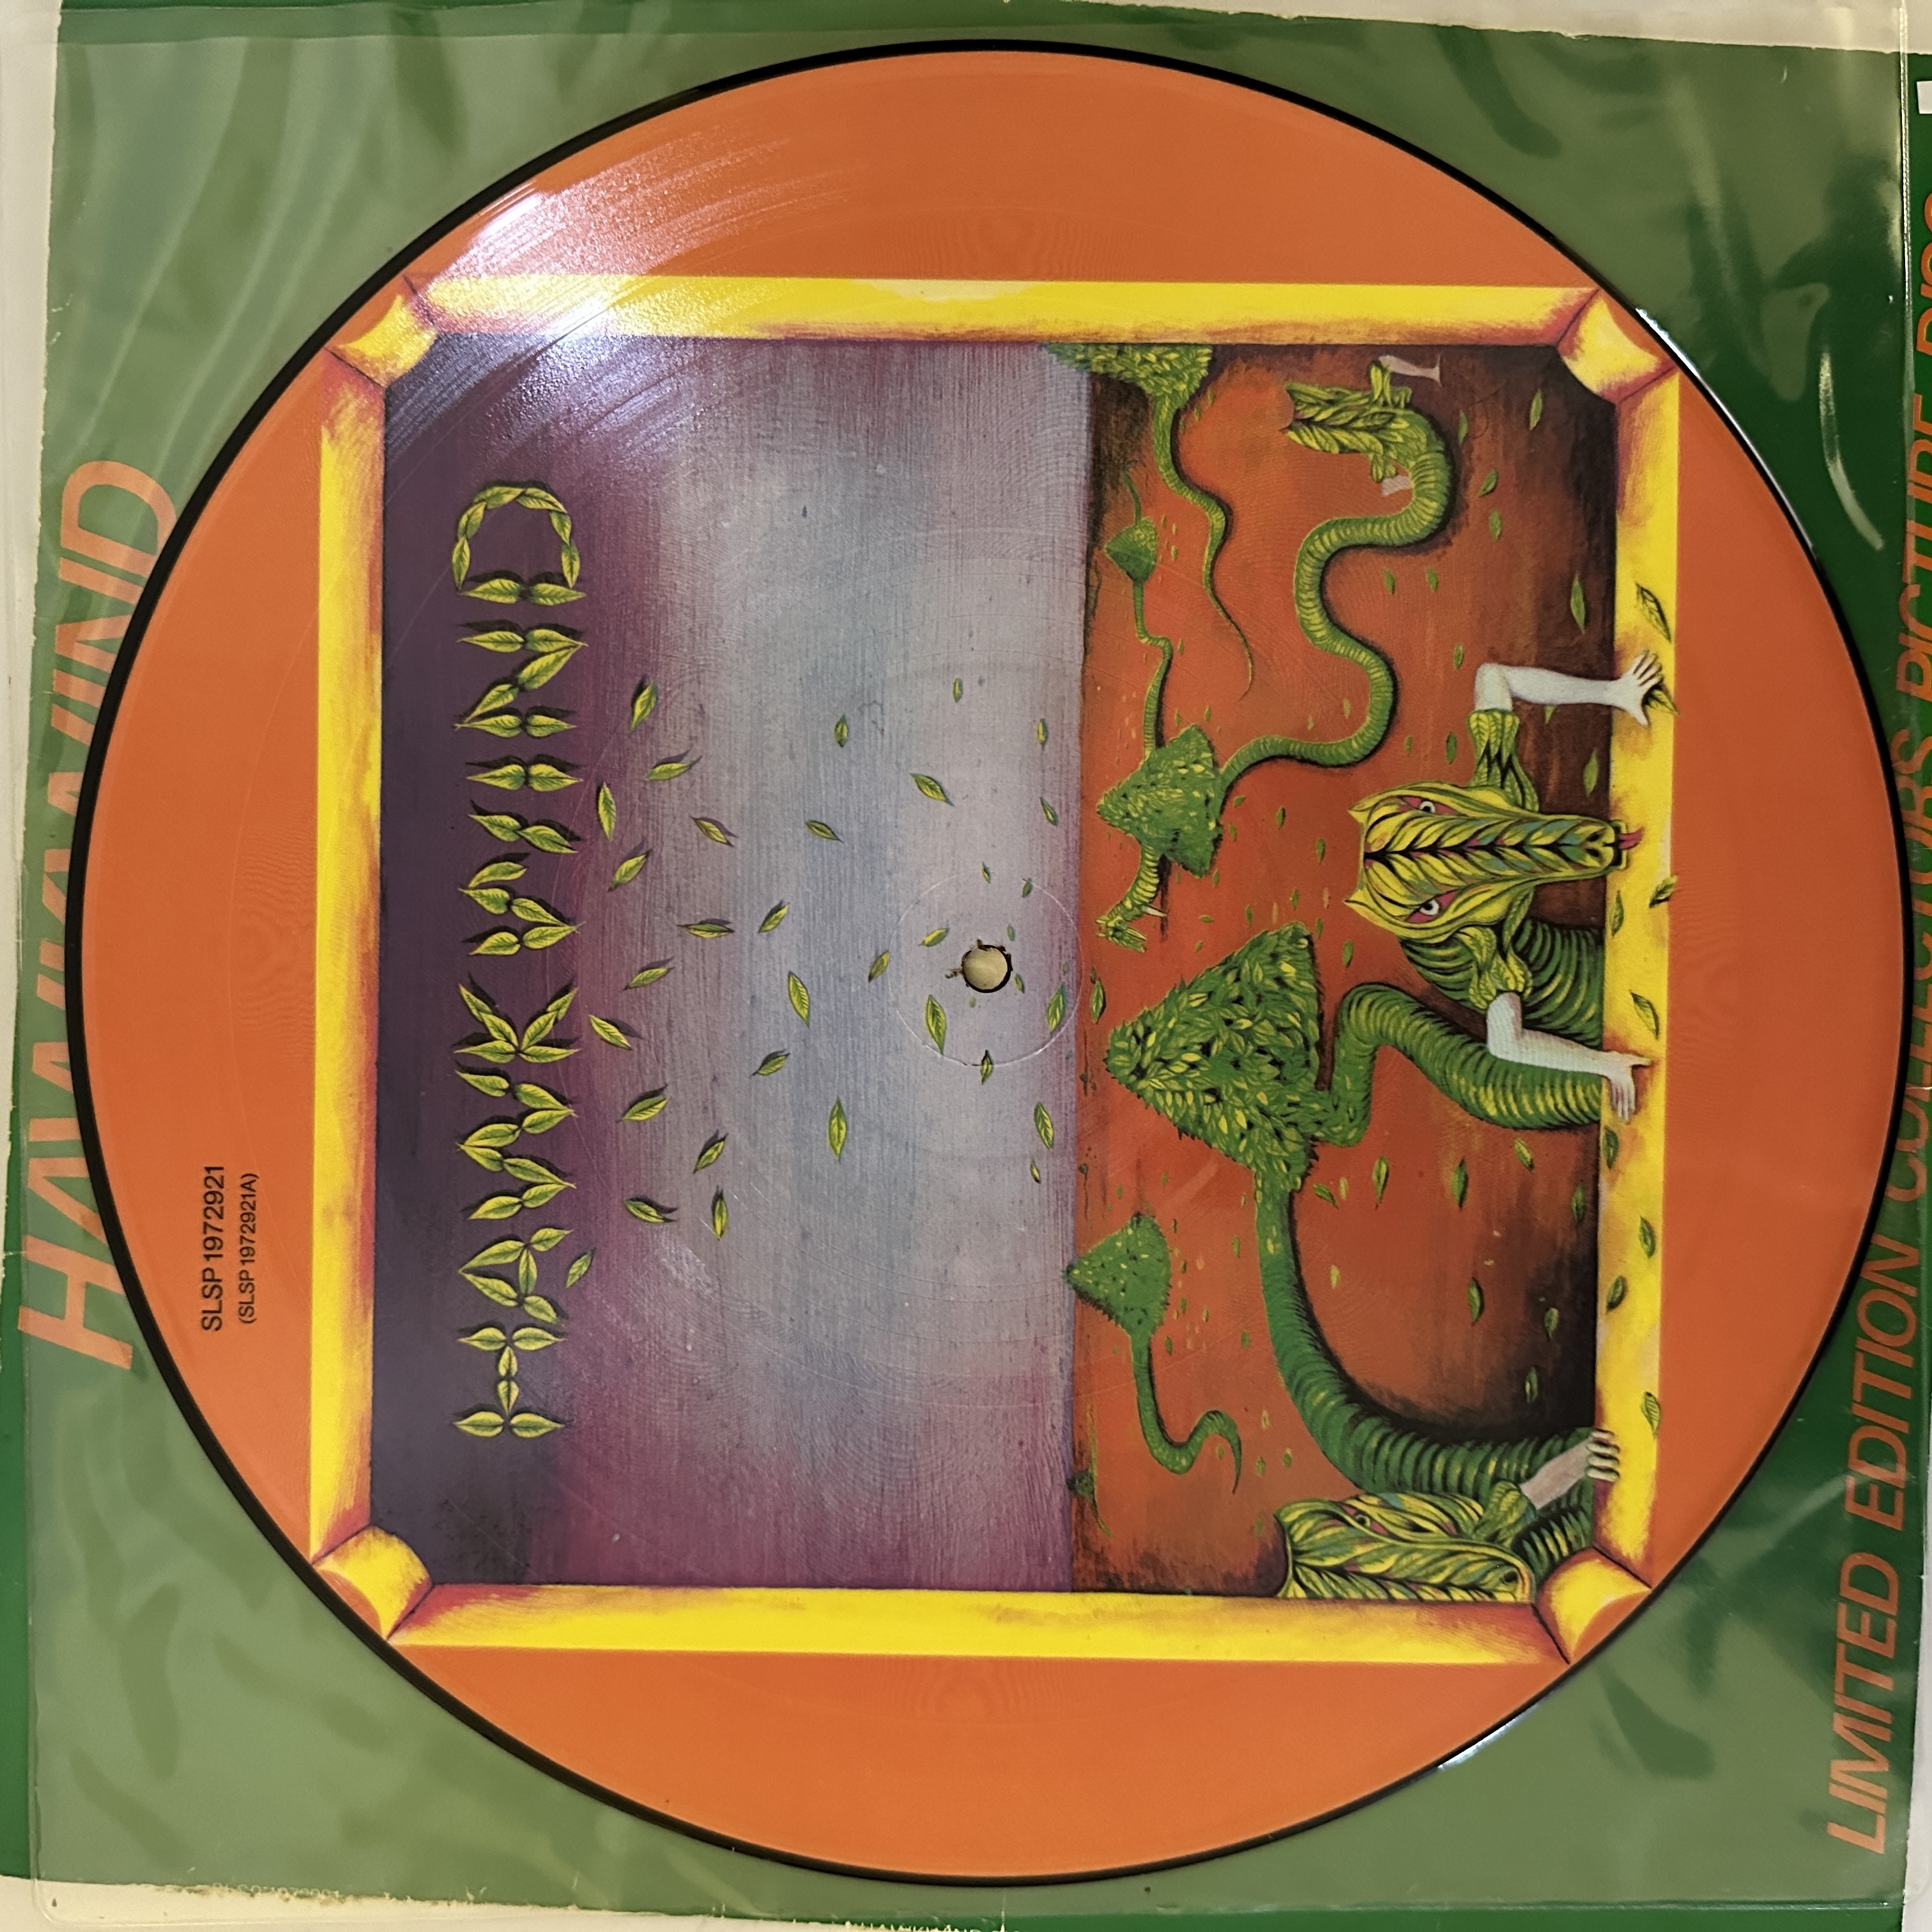 Hawkwind limited edition picture disc - Image 5 of 8